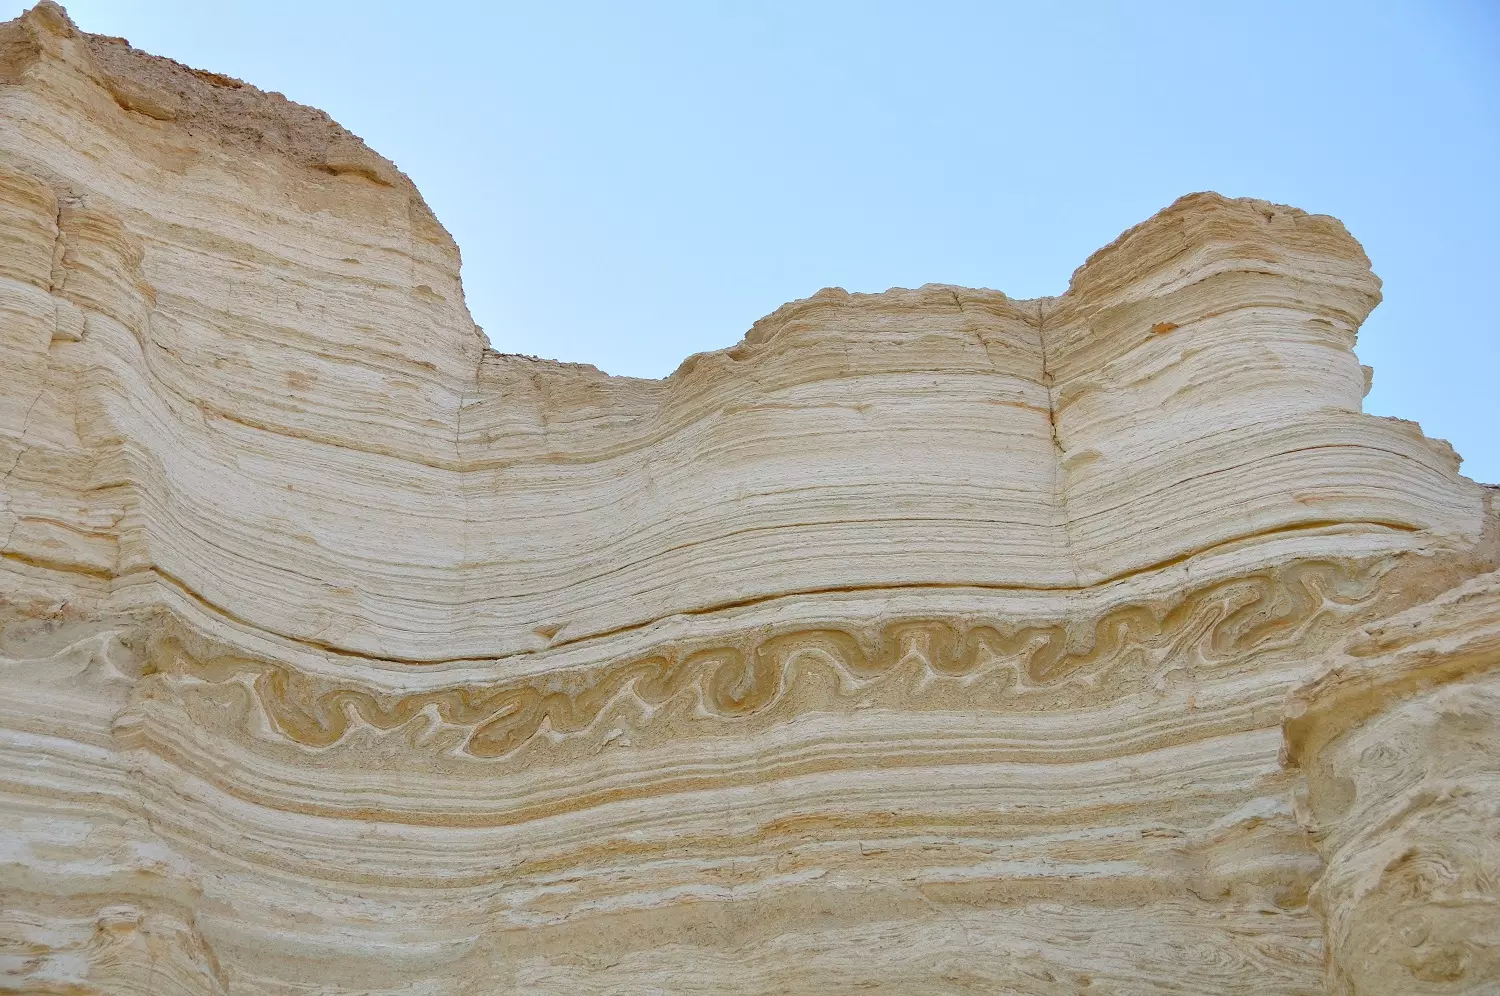 Sedimentary layers in Israel showing the serpentine folding an earthquake caused: ID 22433417 © Hugoht | Dreamstime.com